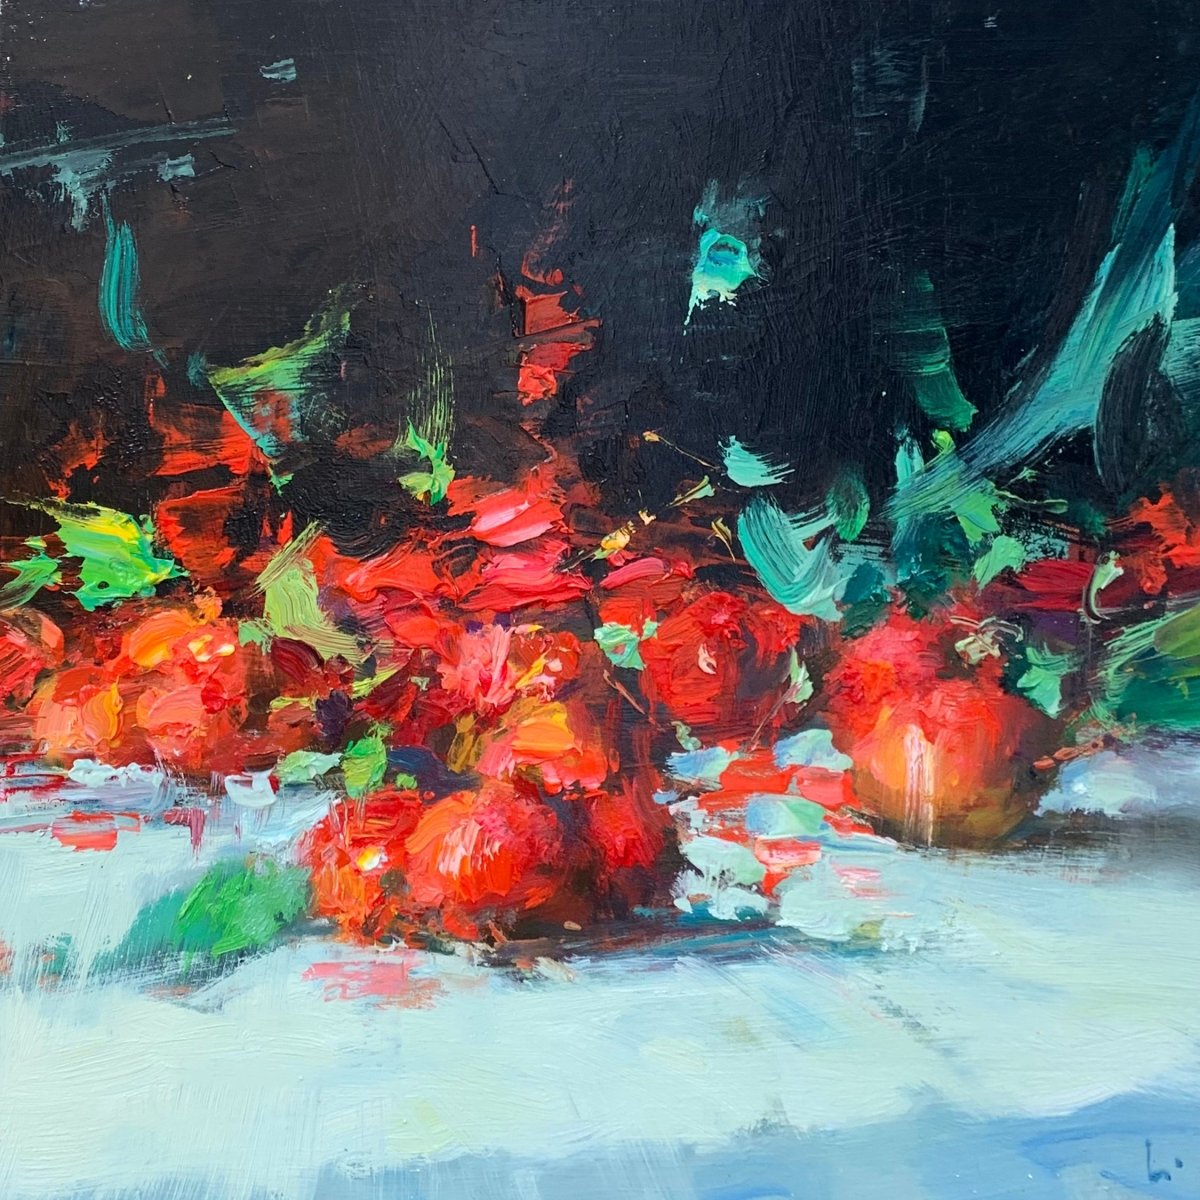 Crabapples #4 by Ning Lee at LePrince Galleries